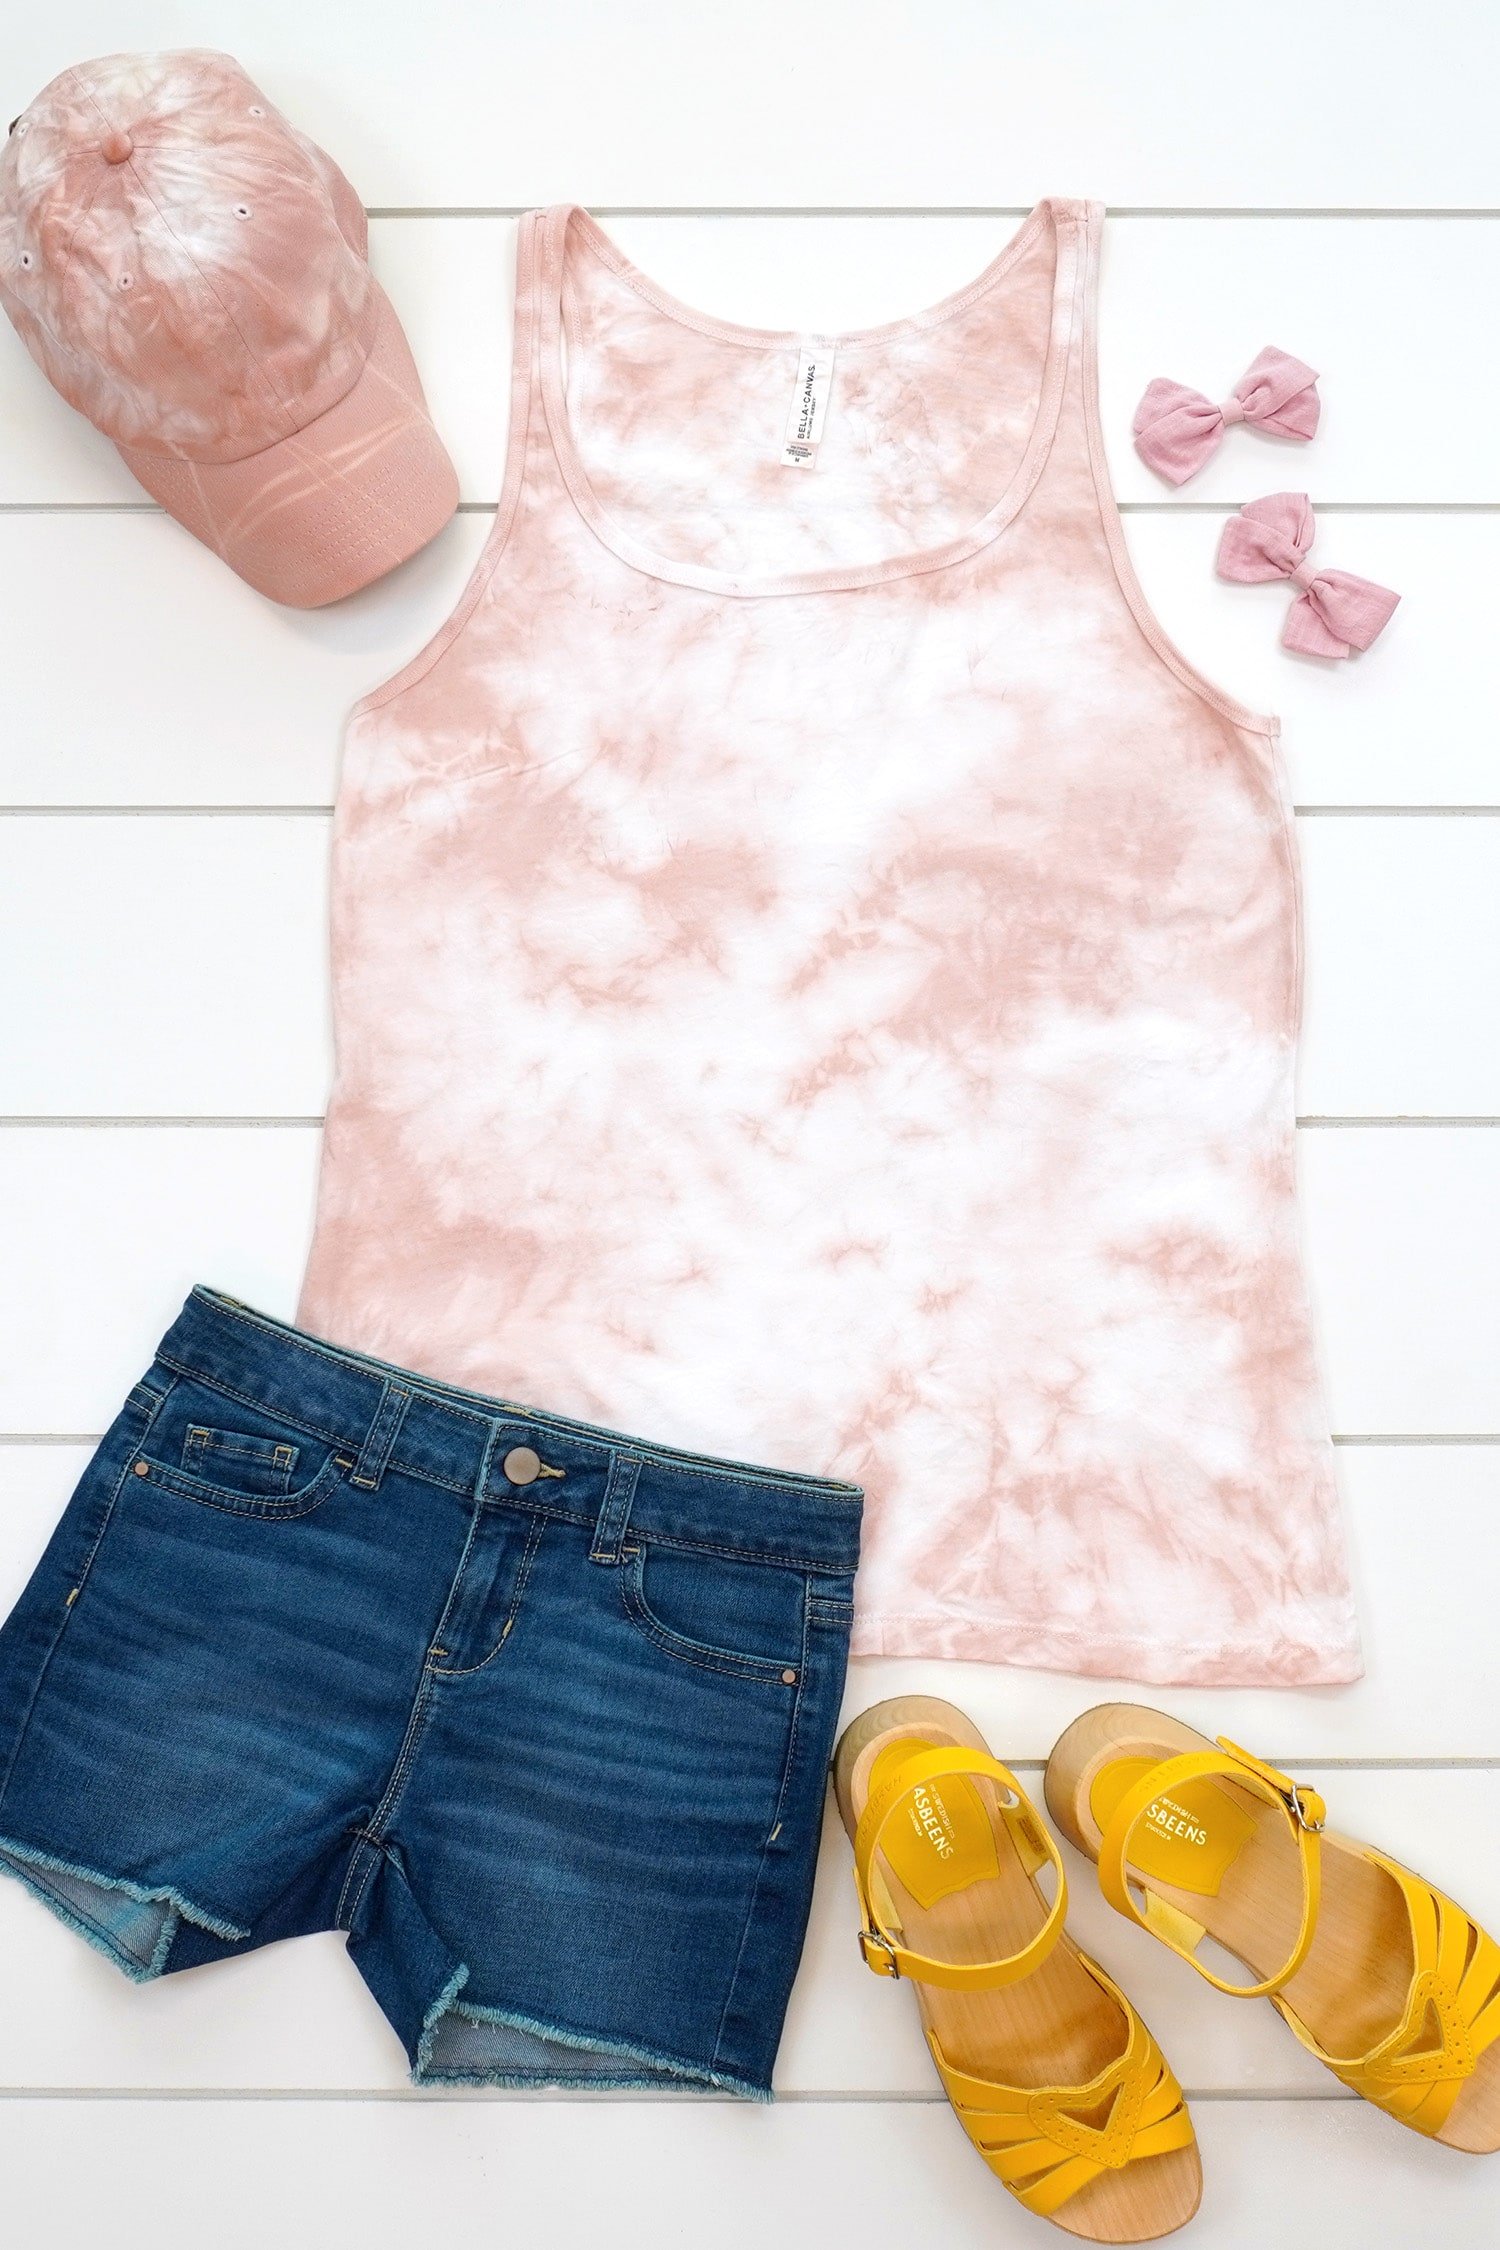 Blush pink tie-dye tank top and baseball hat made with avocado dye staged with an outfit and flowers on a white background